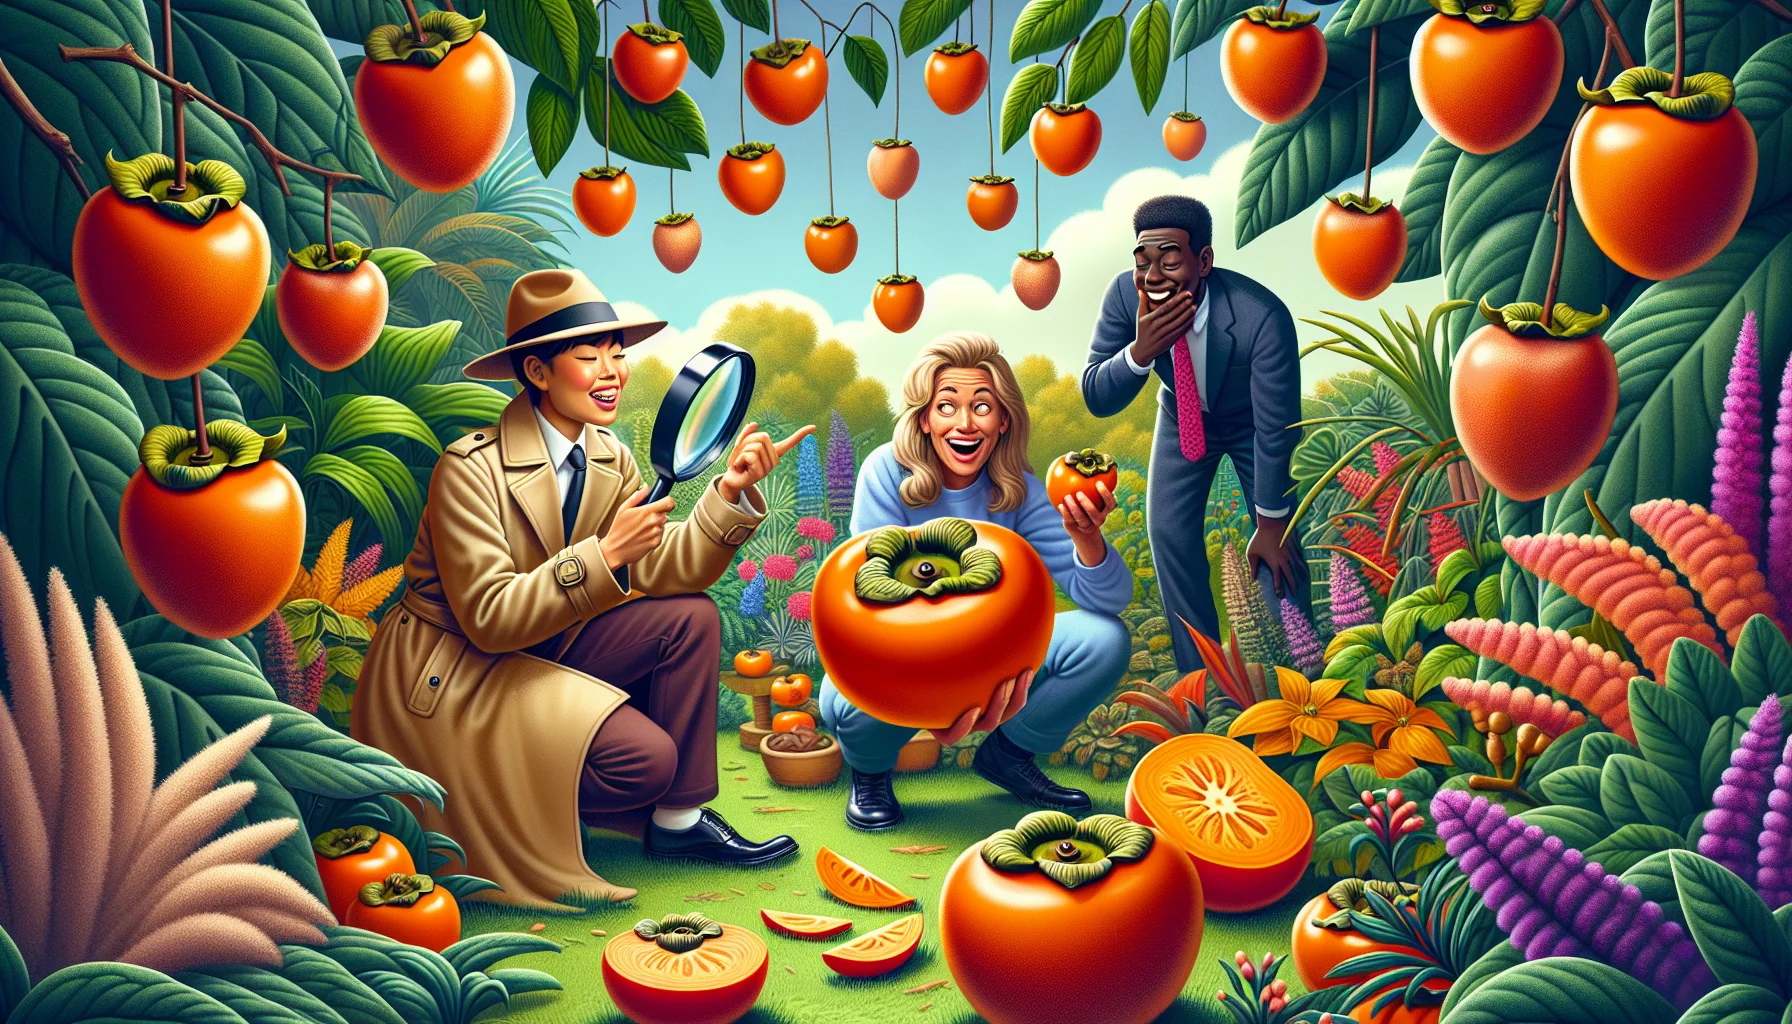 Create a humorous and engaging scenario illustrating how to tell when persimmons are ripe. The scene unfolds in a lush and vibrant garden, full of diverse plants and flora. In the centre, have a Caucasian woman dressed as a detective, inspecting a persimmon with a magnifying glass. Nearby, a Black man is chuckling, holding a perfectly ripe persimmon, the orange hue vivid and inviting. Use details like ripe coloration, softness, and sweet aroma to hint at the ripeness of persimmons. The overall image should communicate the joy and wonder of gardening and nature.